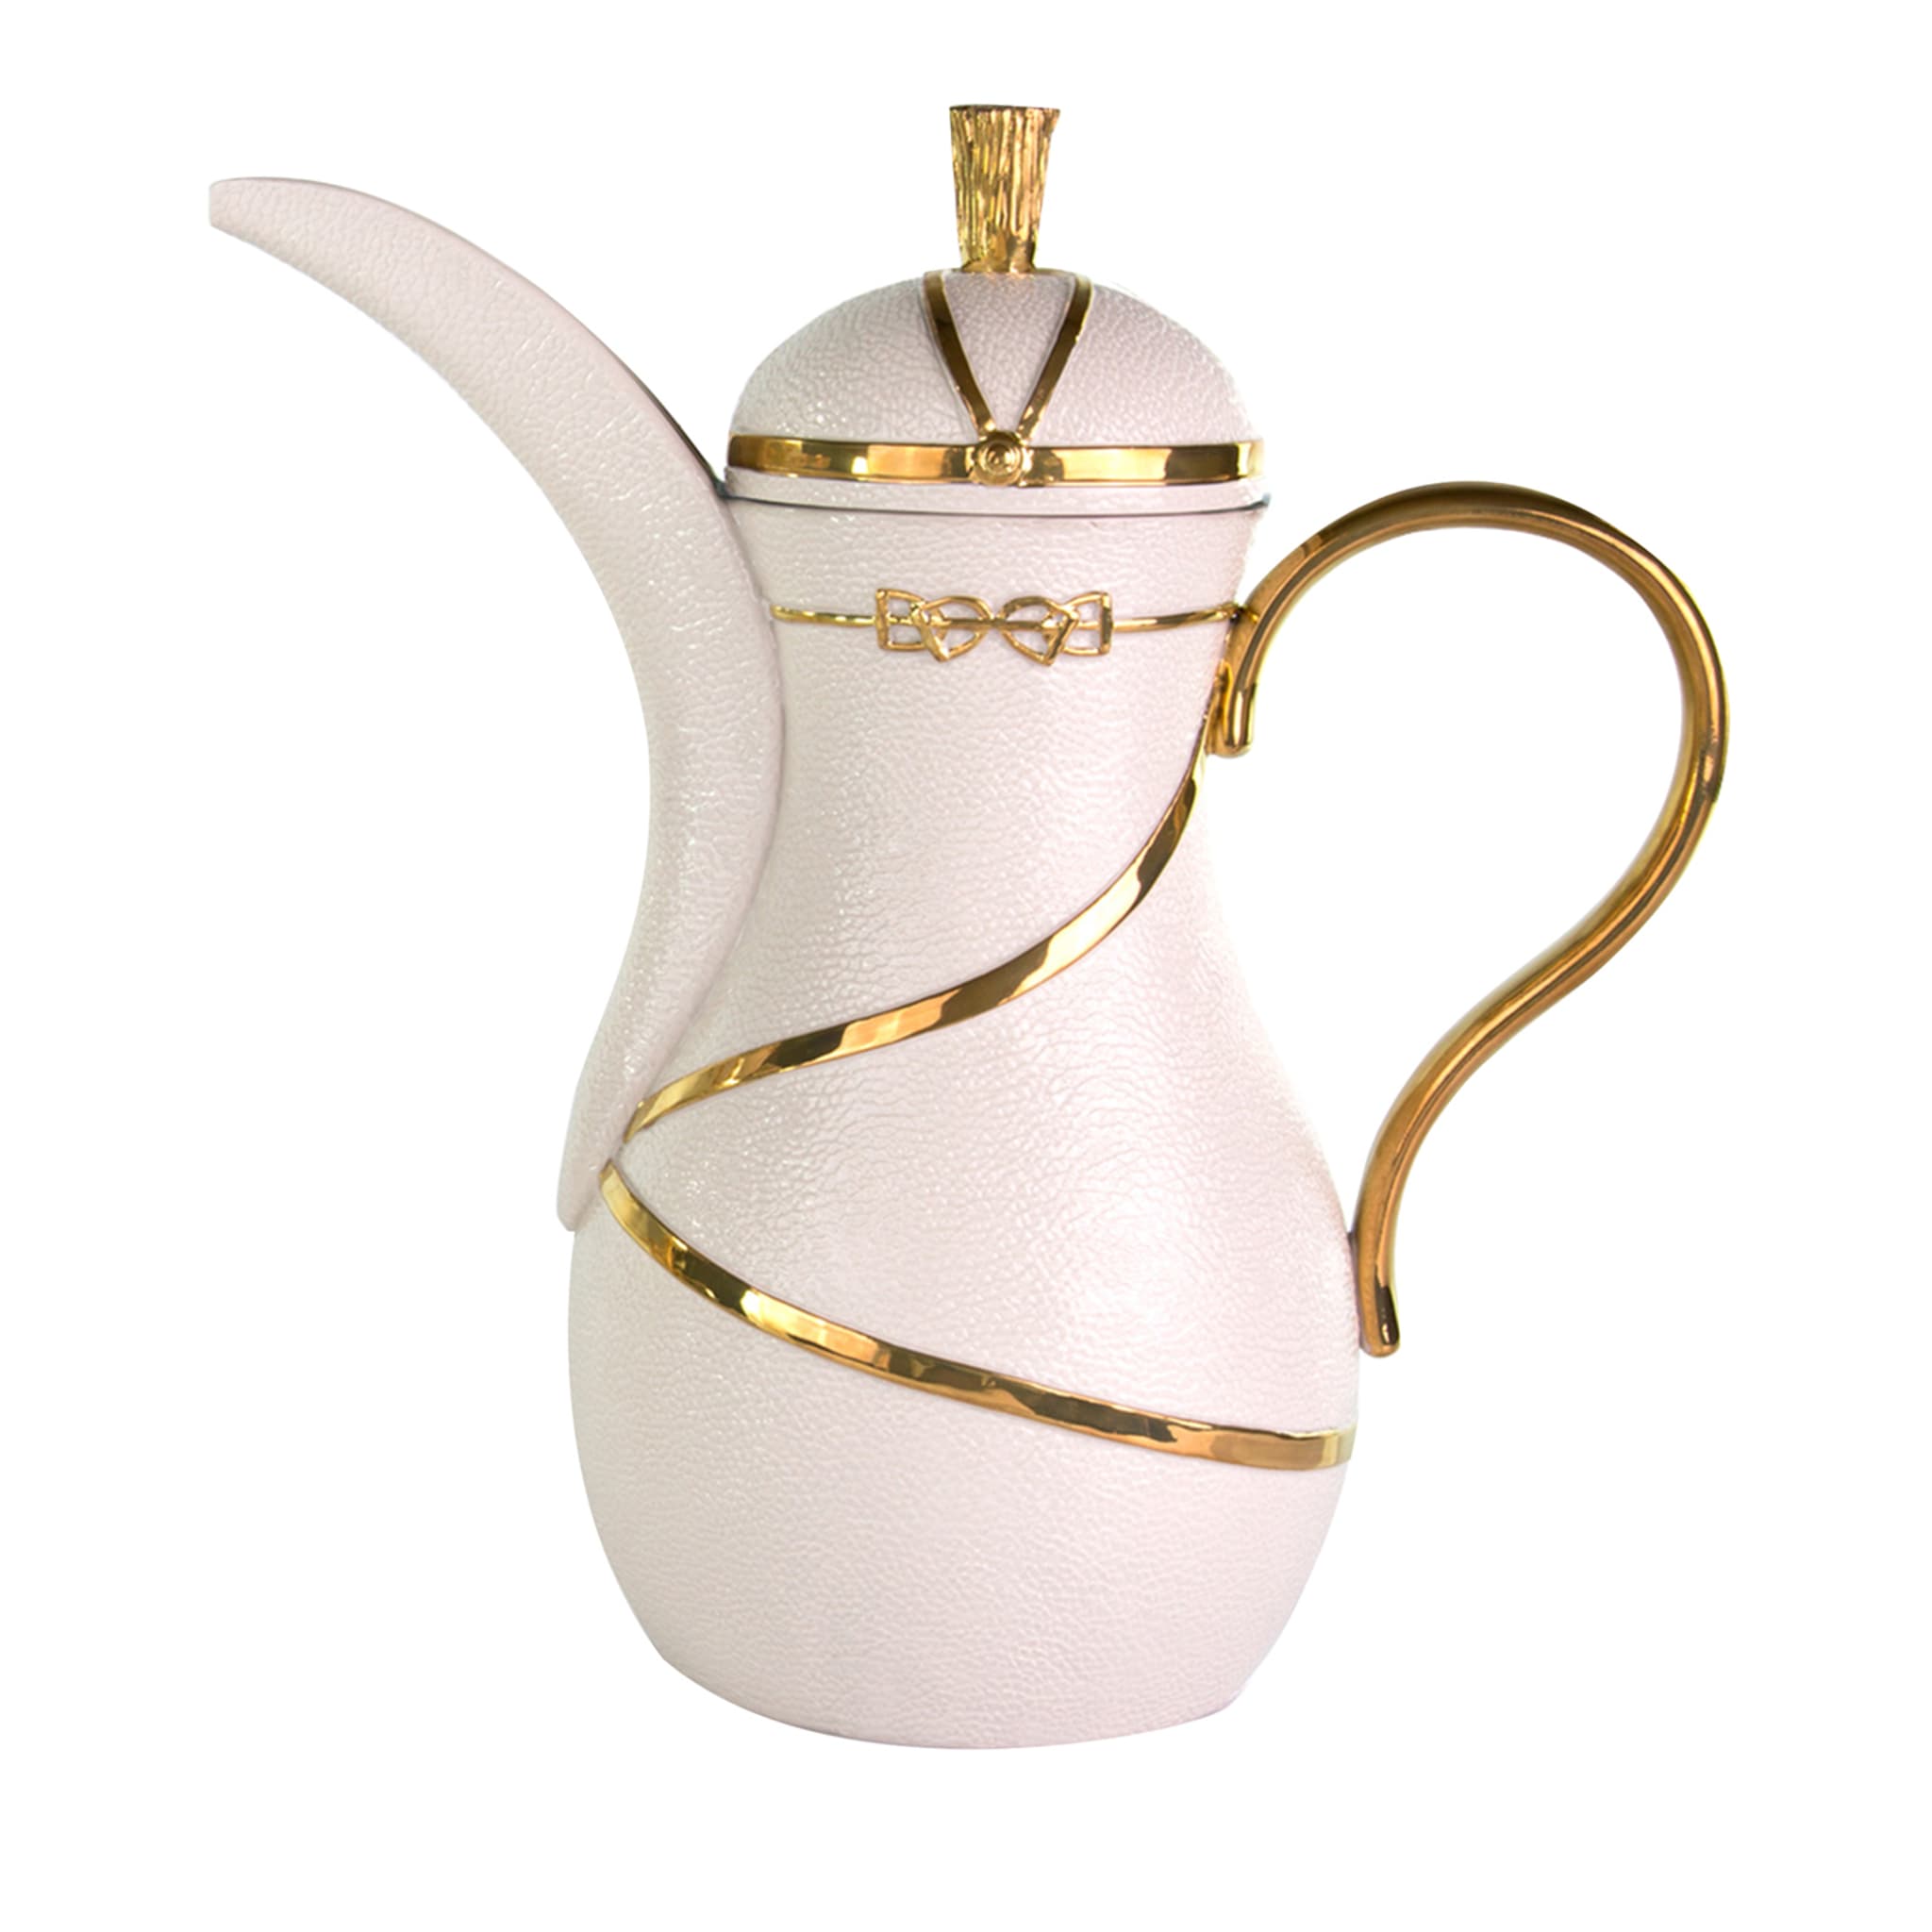 DRESSAGE DALLAH THERMOS - WHITE AND GOLD - Main view